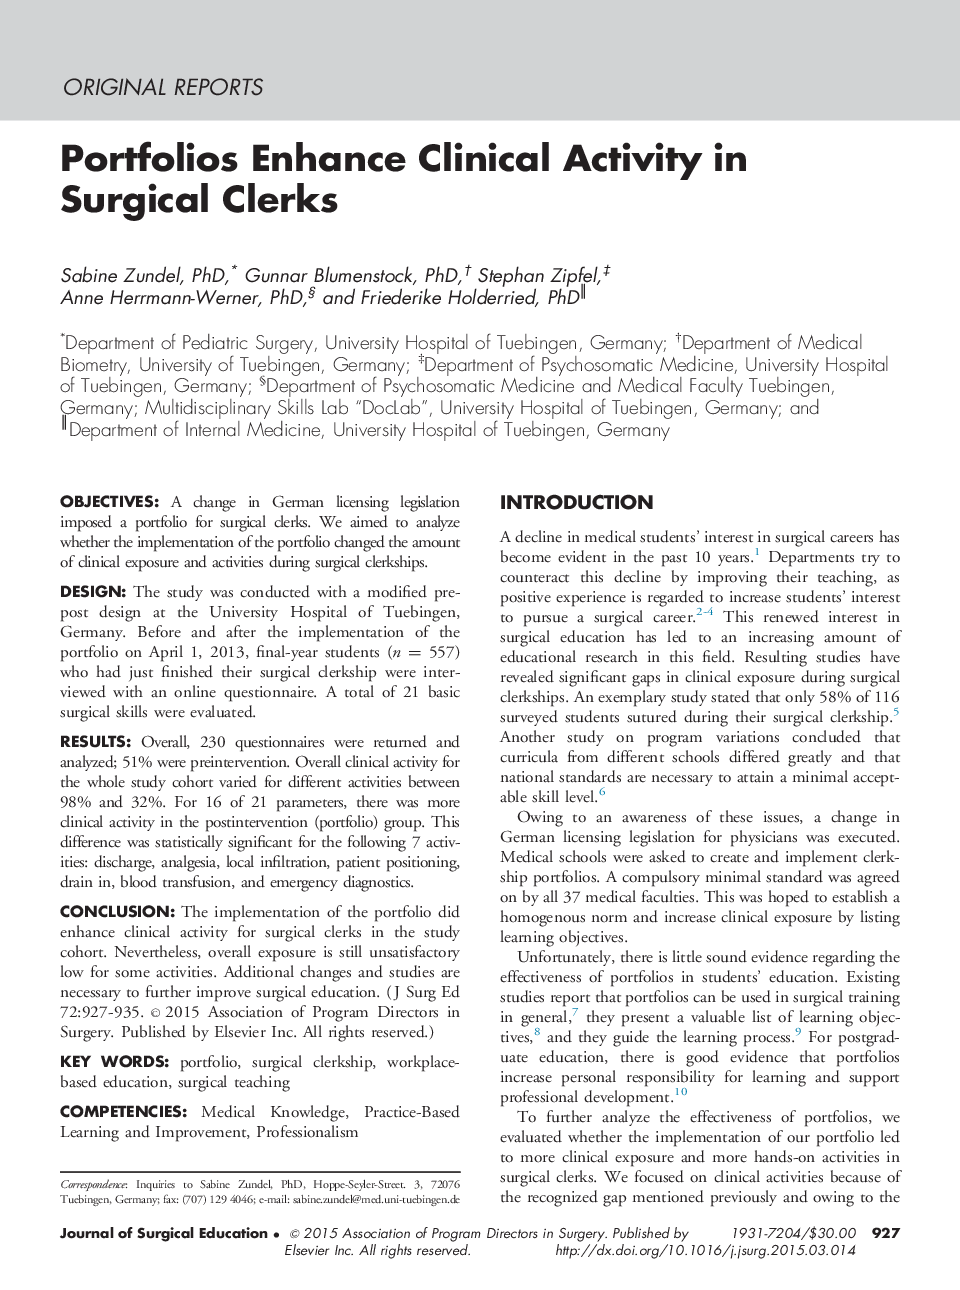 Portfolios Enhance Clinical Activity in Surgical Clerks